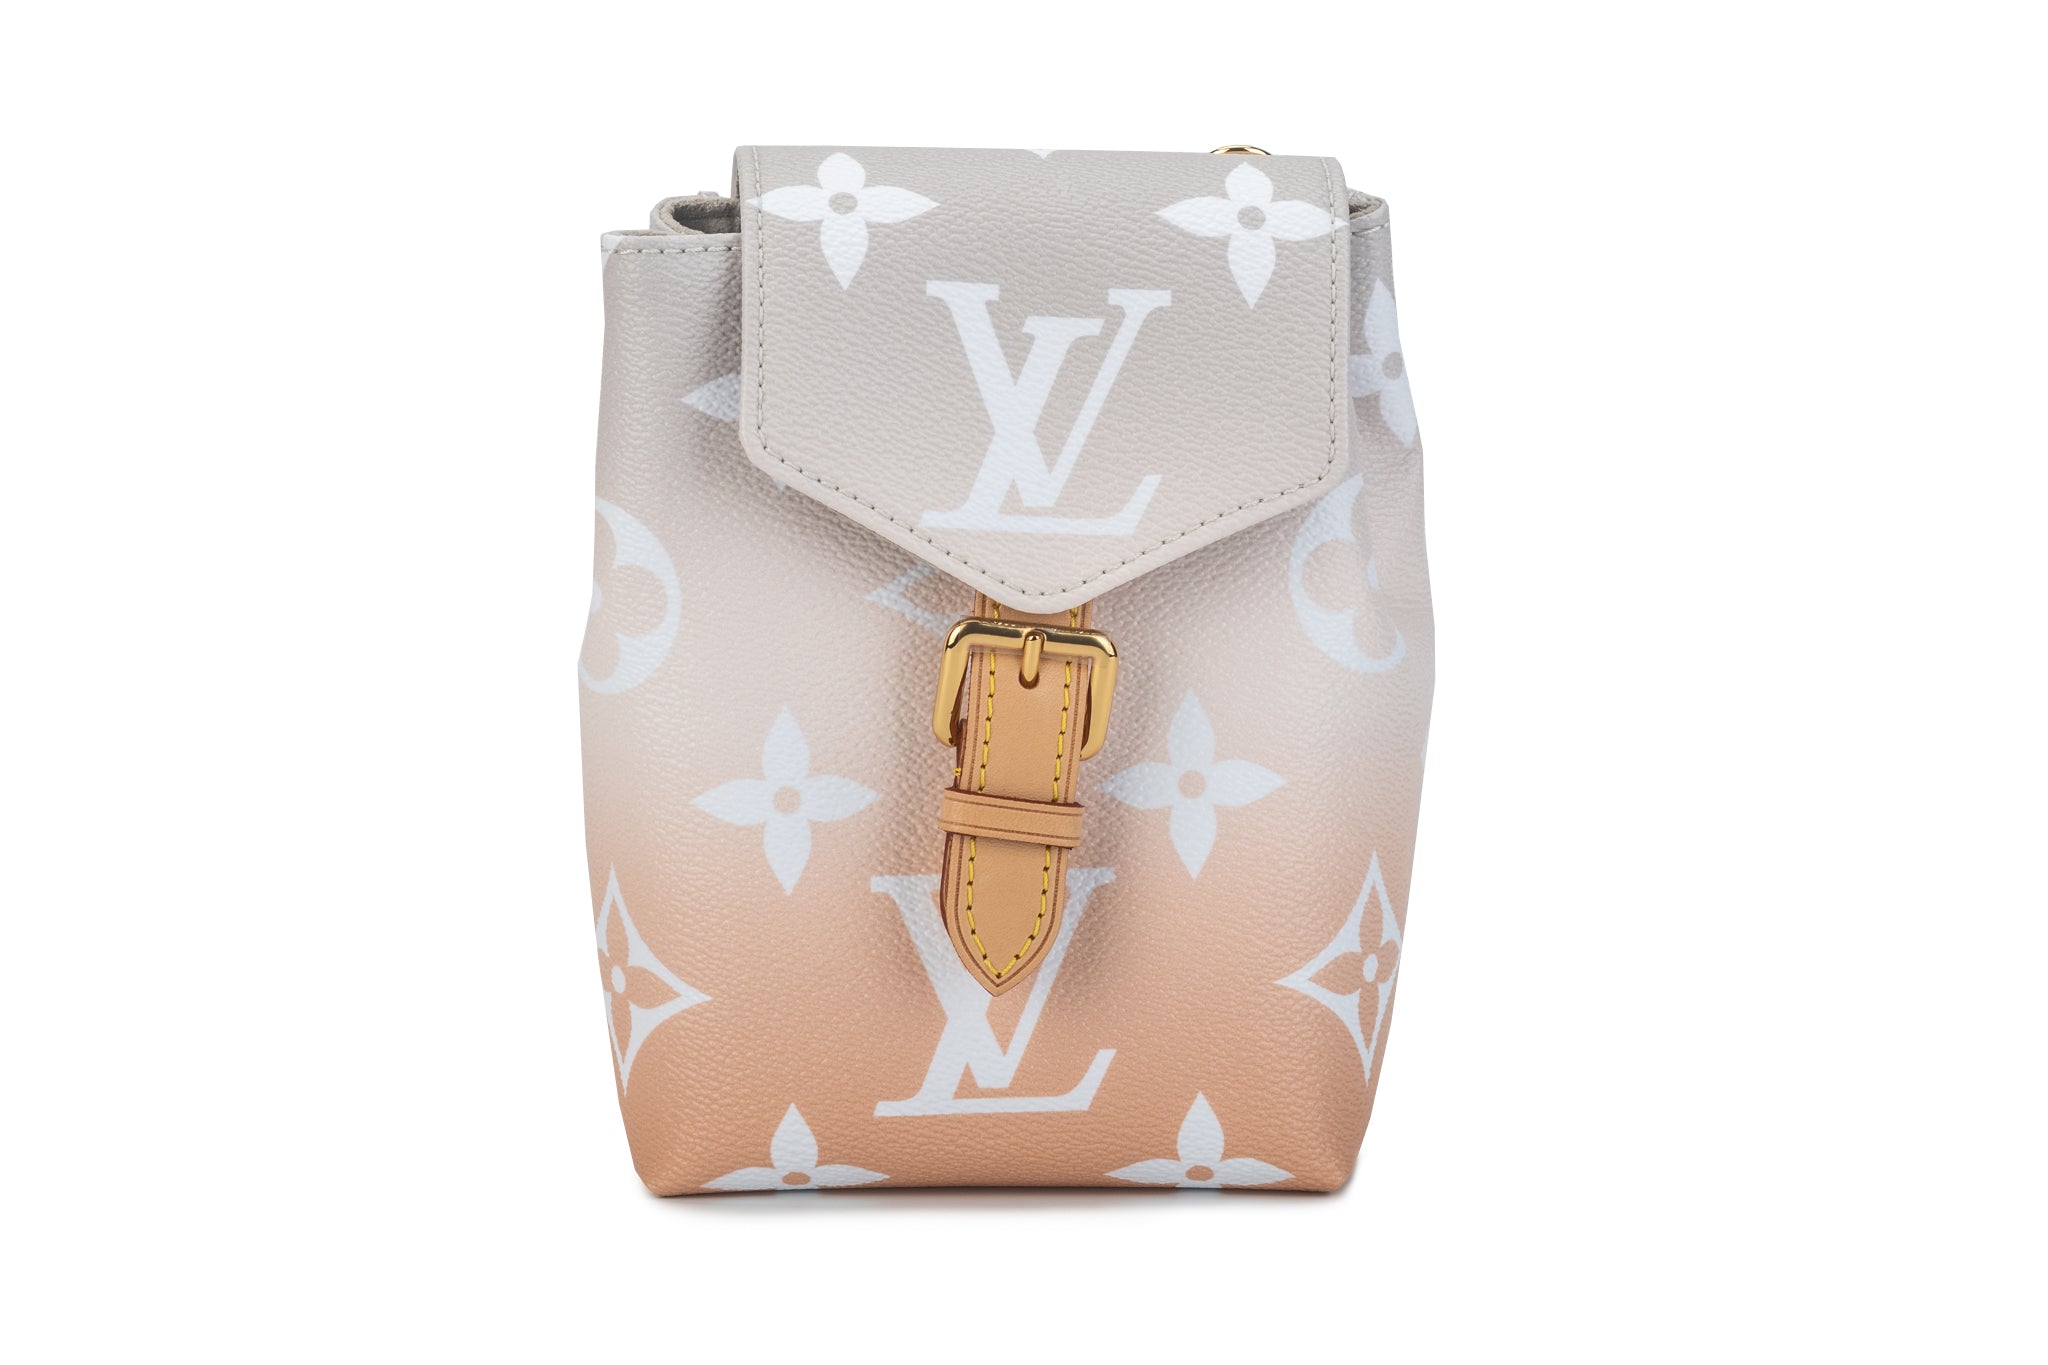 A 1996 Louis Vuitton Backpack with an attached umbrella is up for